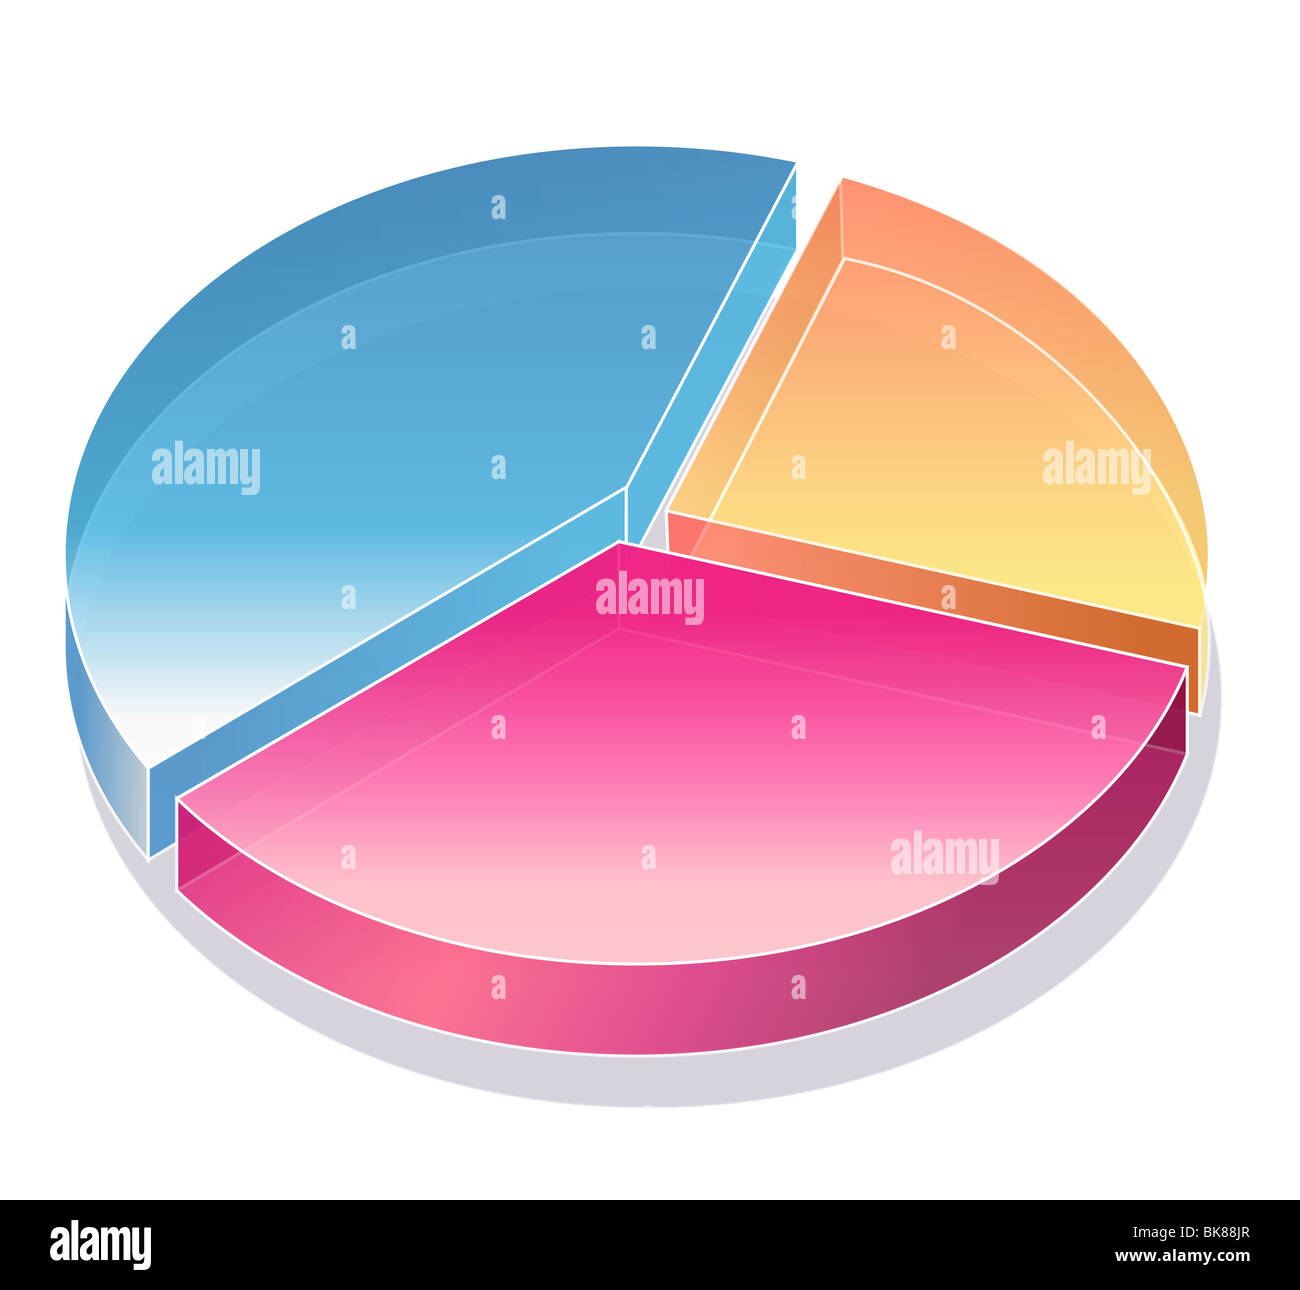 color pie chart in the white background Stock Photo